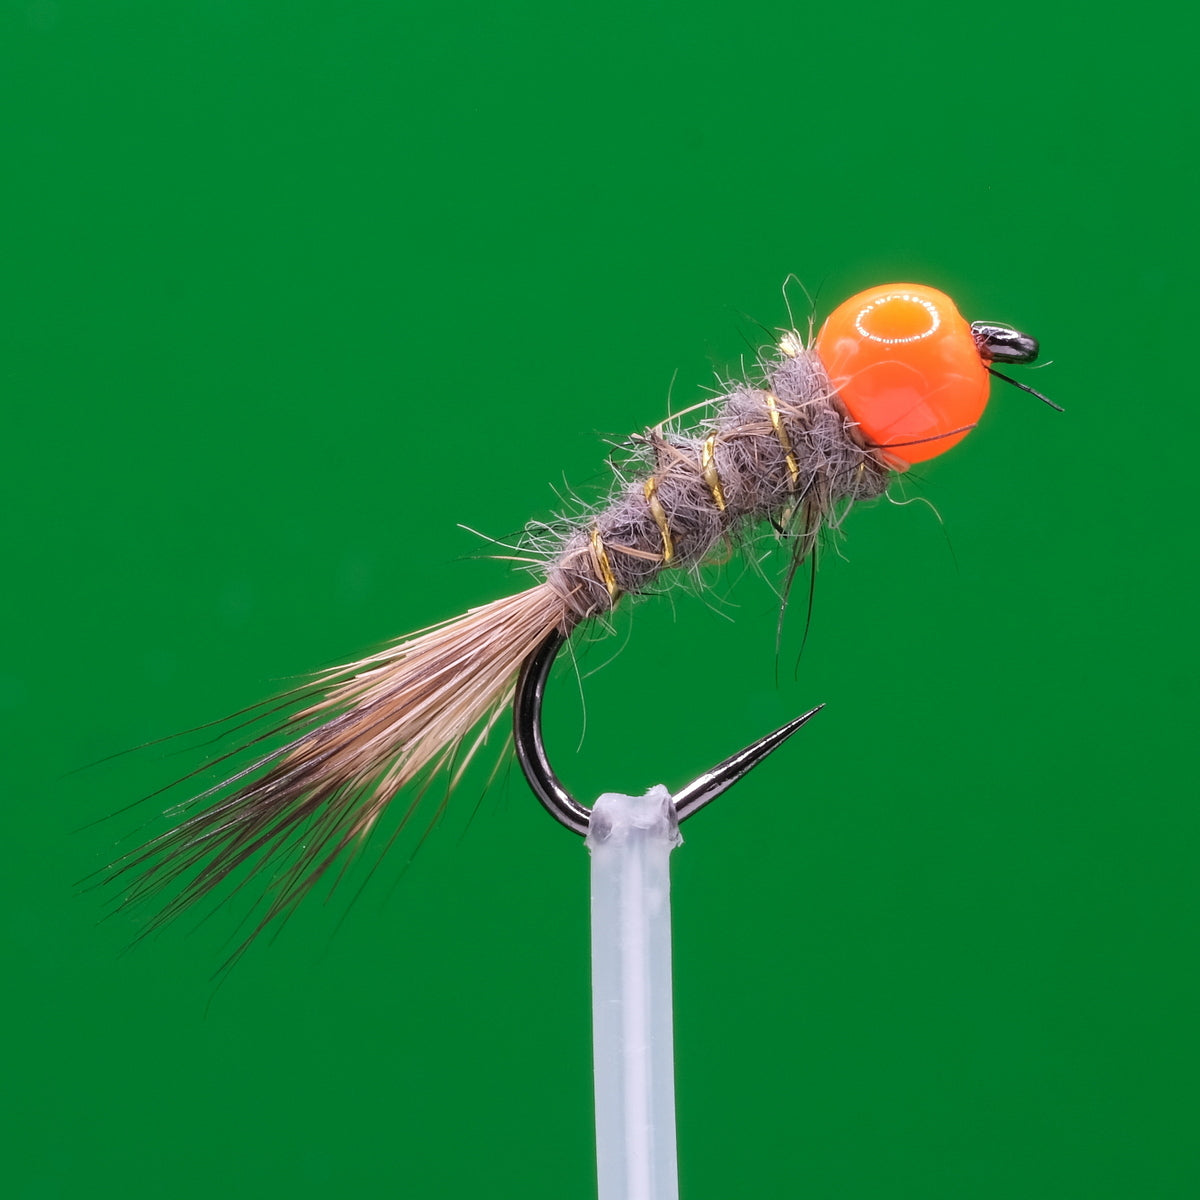 Sulcifly - Subscription Fly Fishing Box, Dry Flies, Nymphs and more